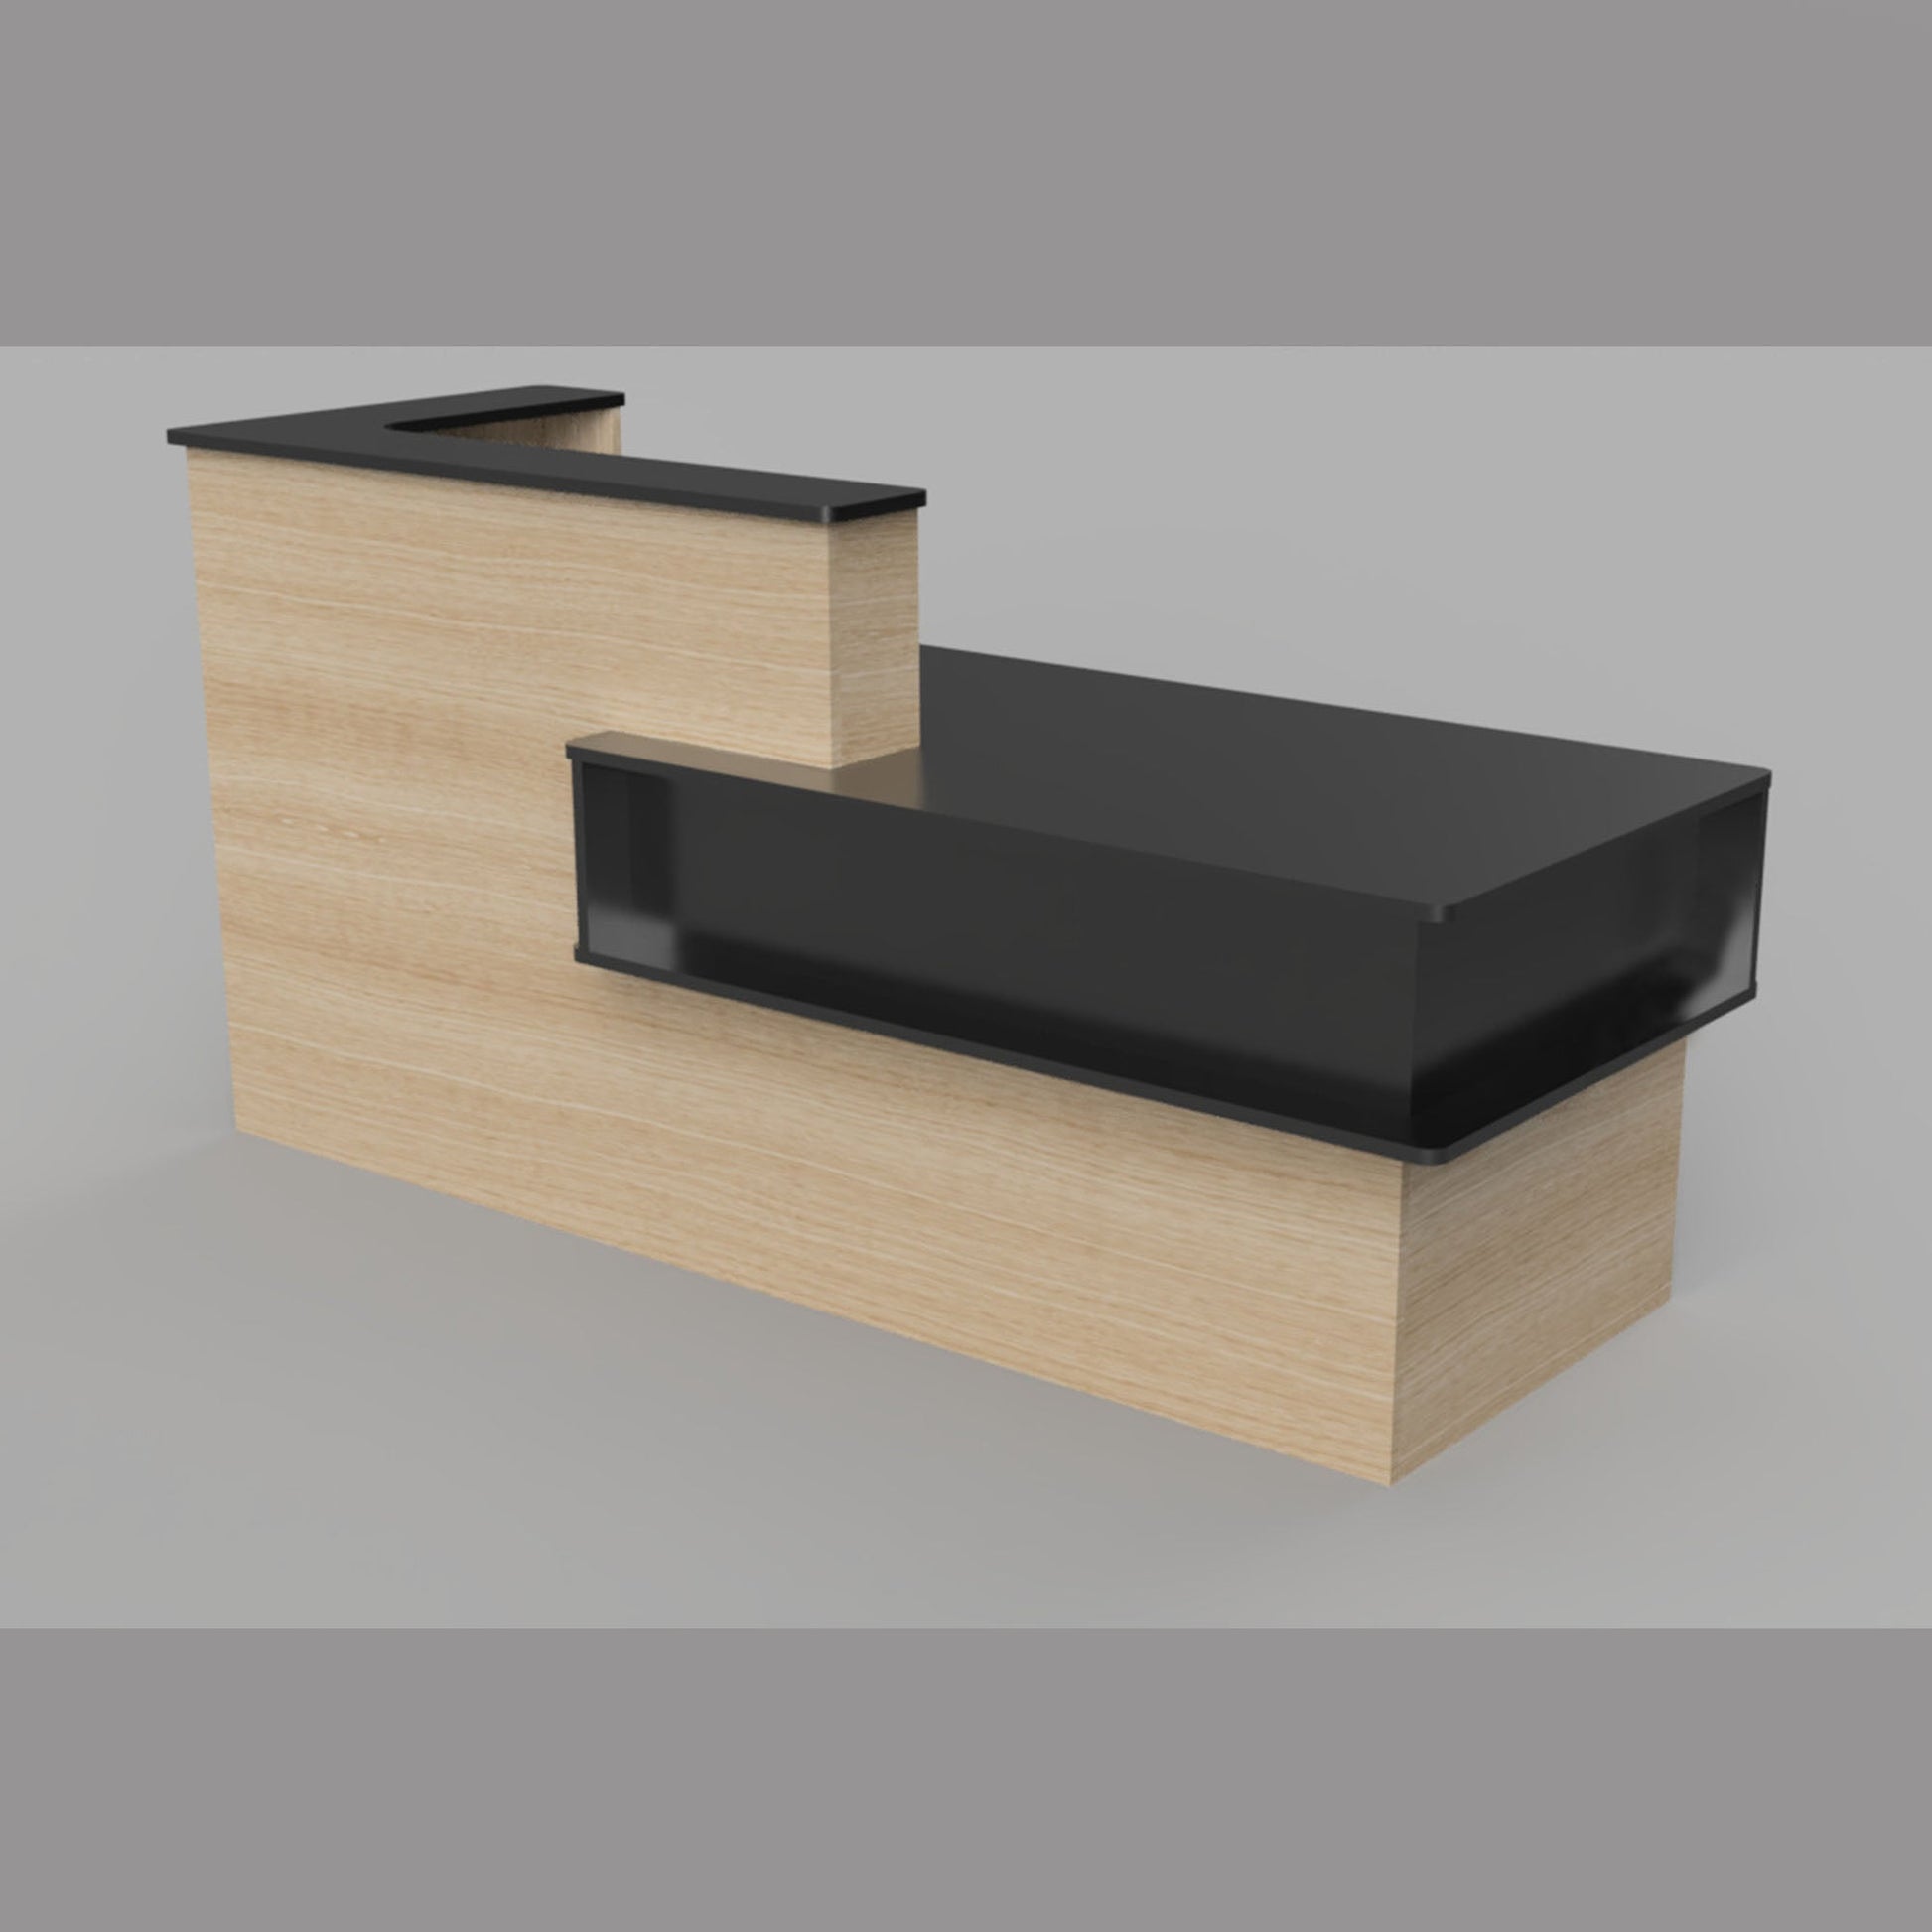 Modern Reception Desk, sales counter, office desk, or front desk. This modern desk is perfect for any office or retail store.